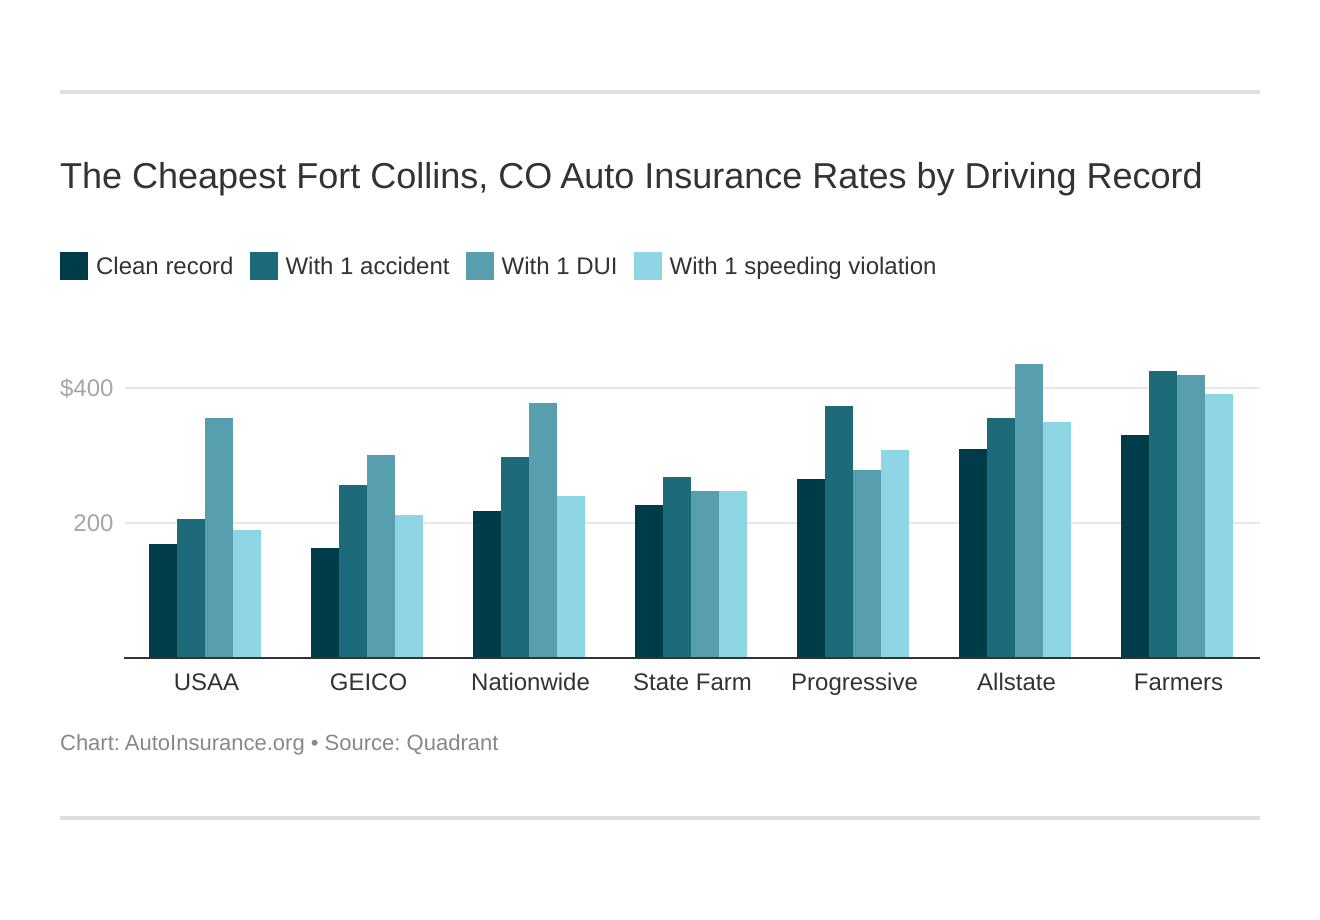 The Cheapest Fort Collins, CO Auto Insurance Rates by Driving Record